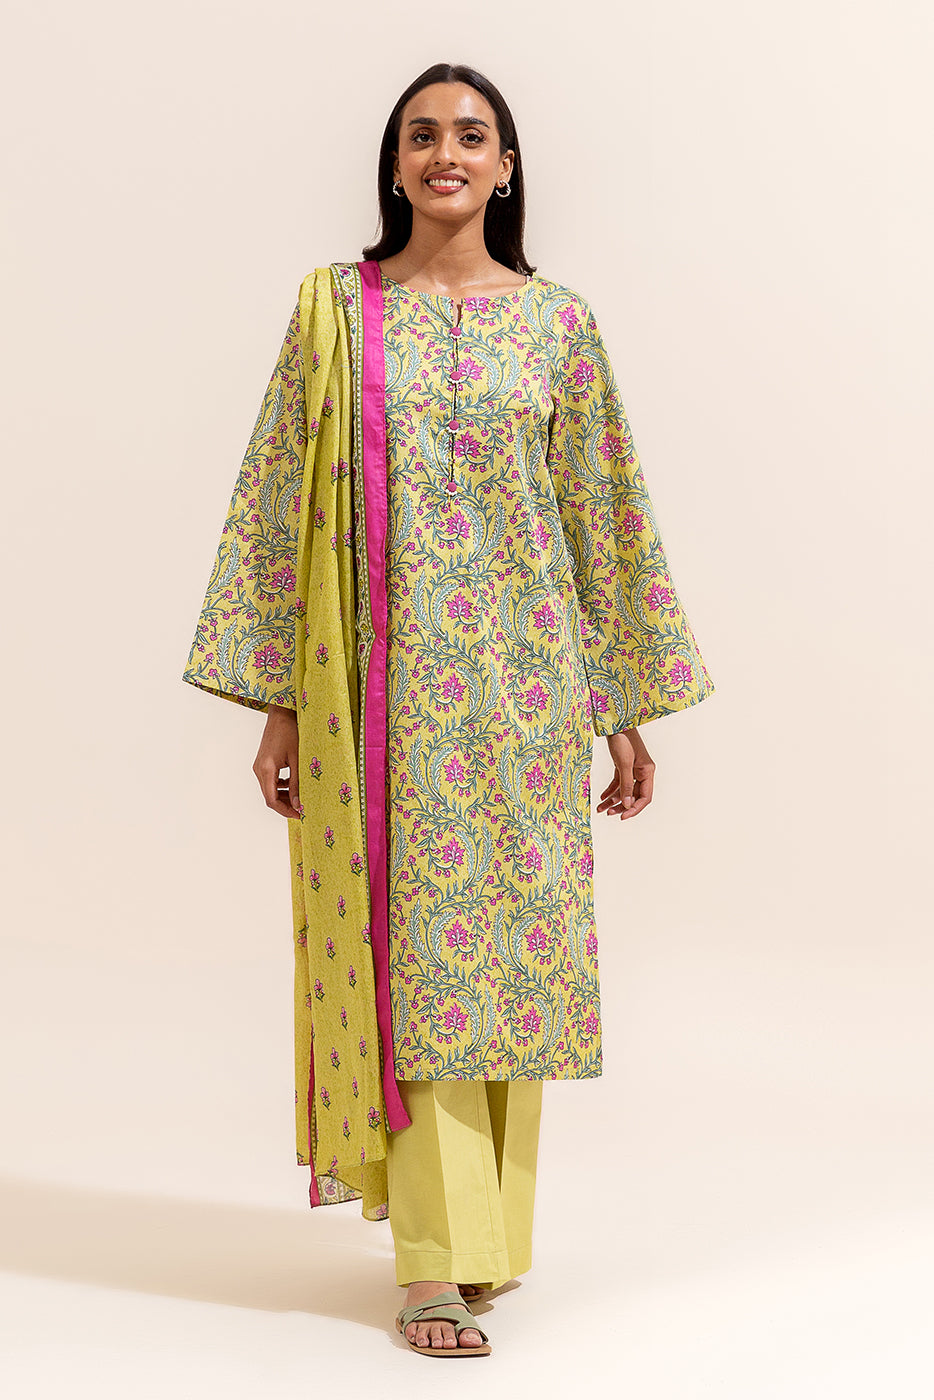 3 PIECE PRINTED LAWN SUIT-FIRST LIGHT (UNSTITCHED)